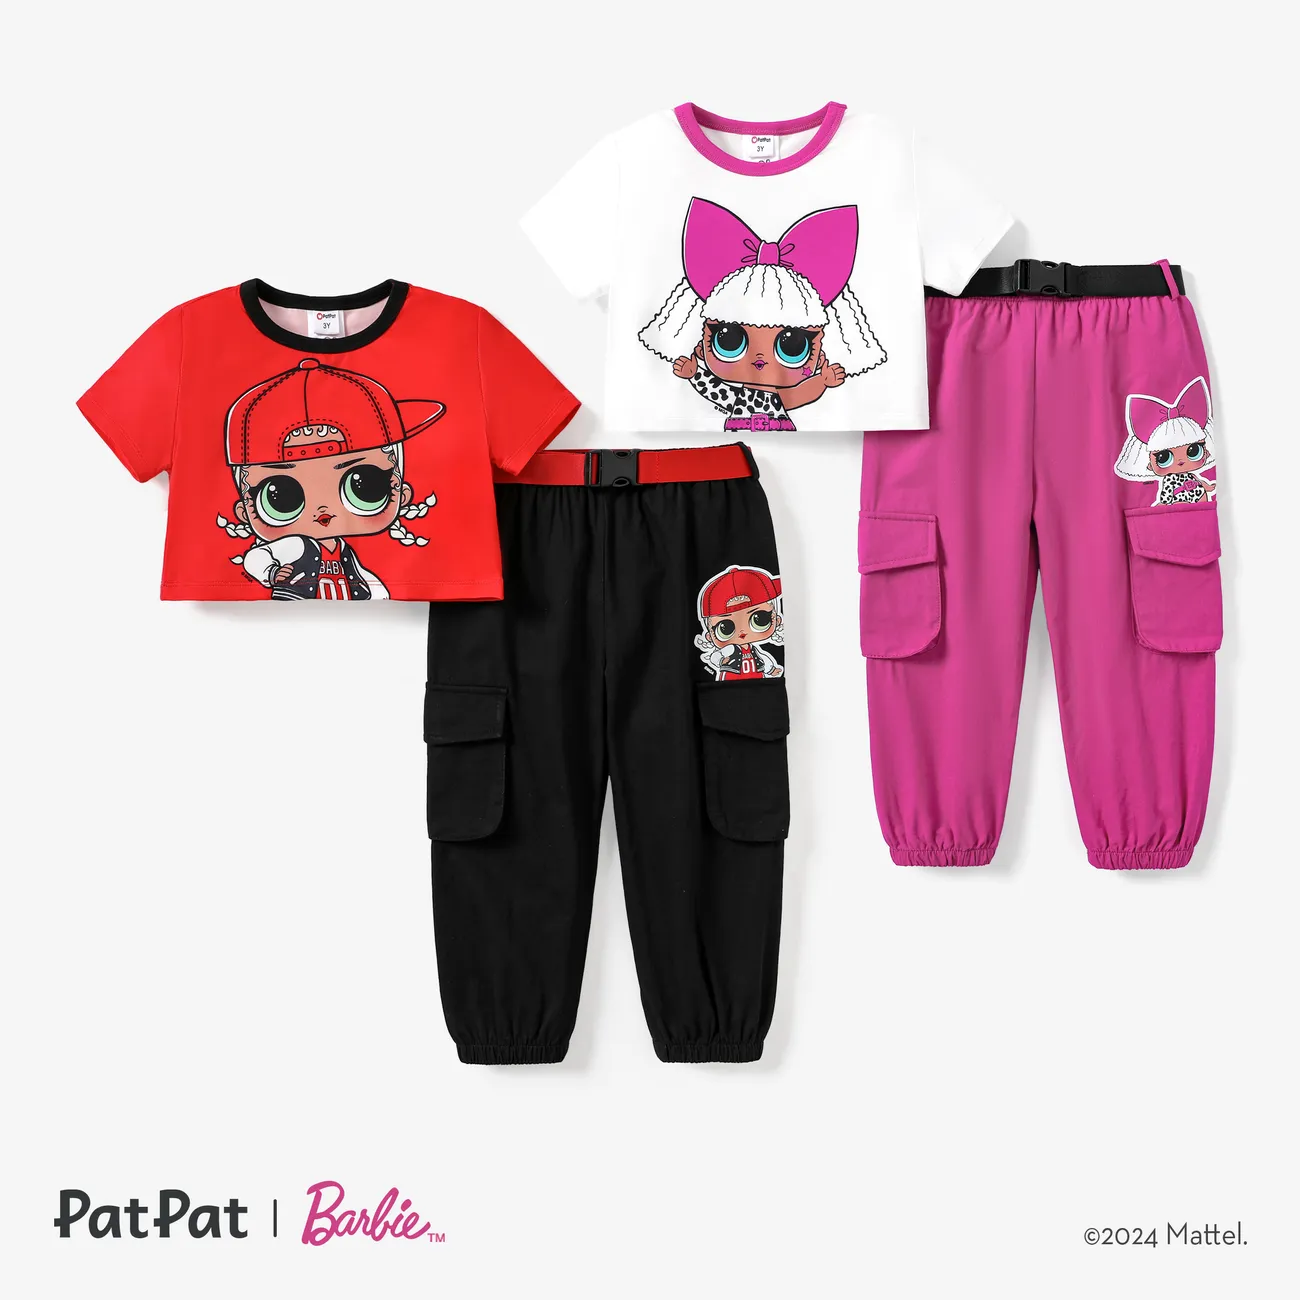 L.O.L. SURPRISE! Toddler/Kid Girl 1pc Tee or Pocket Cargo Pants with Belt OffWhite big image 1